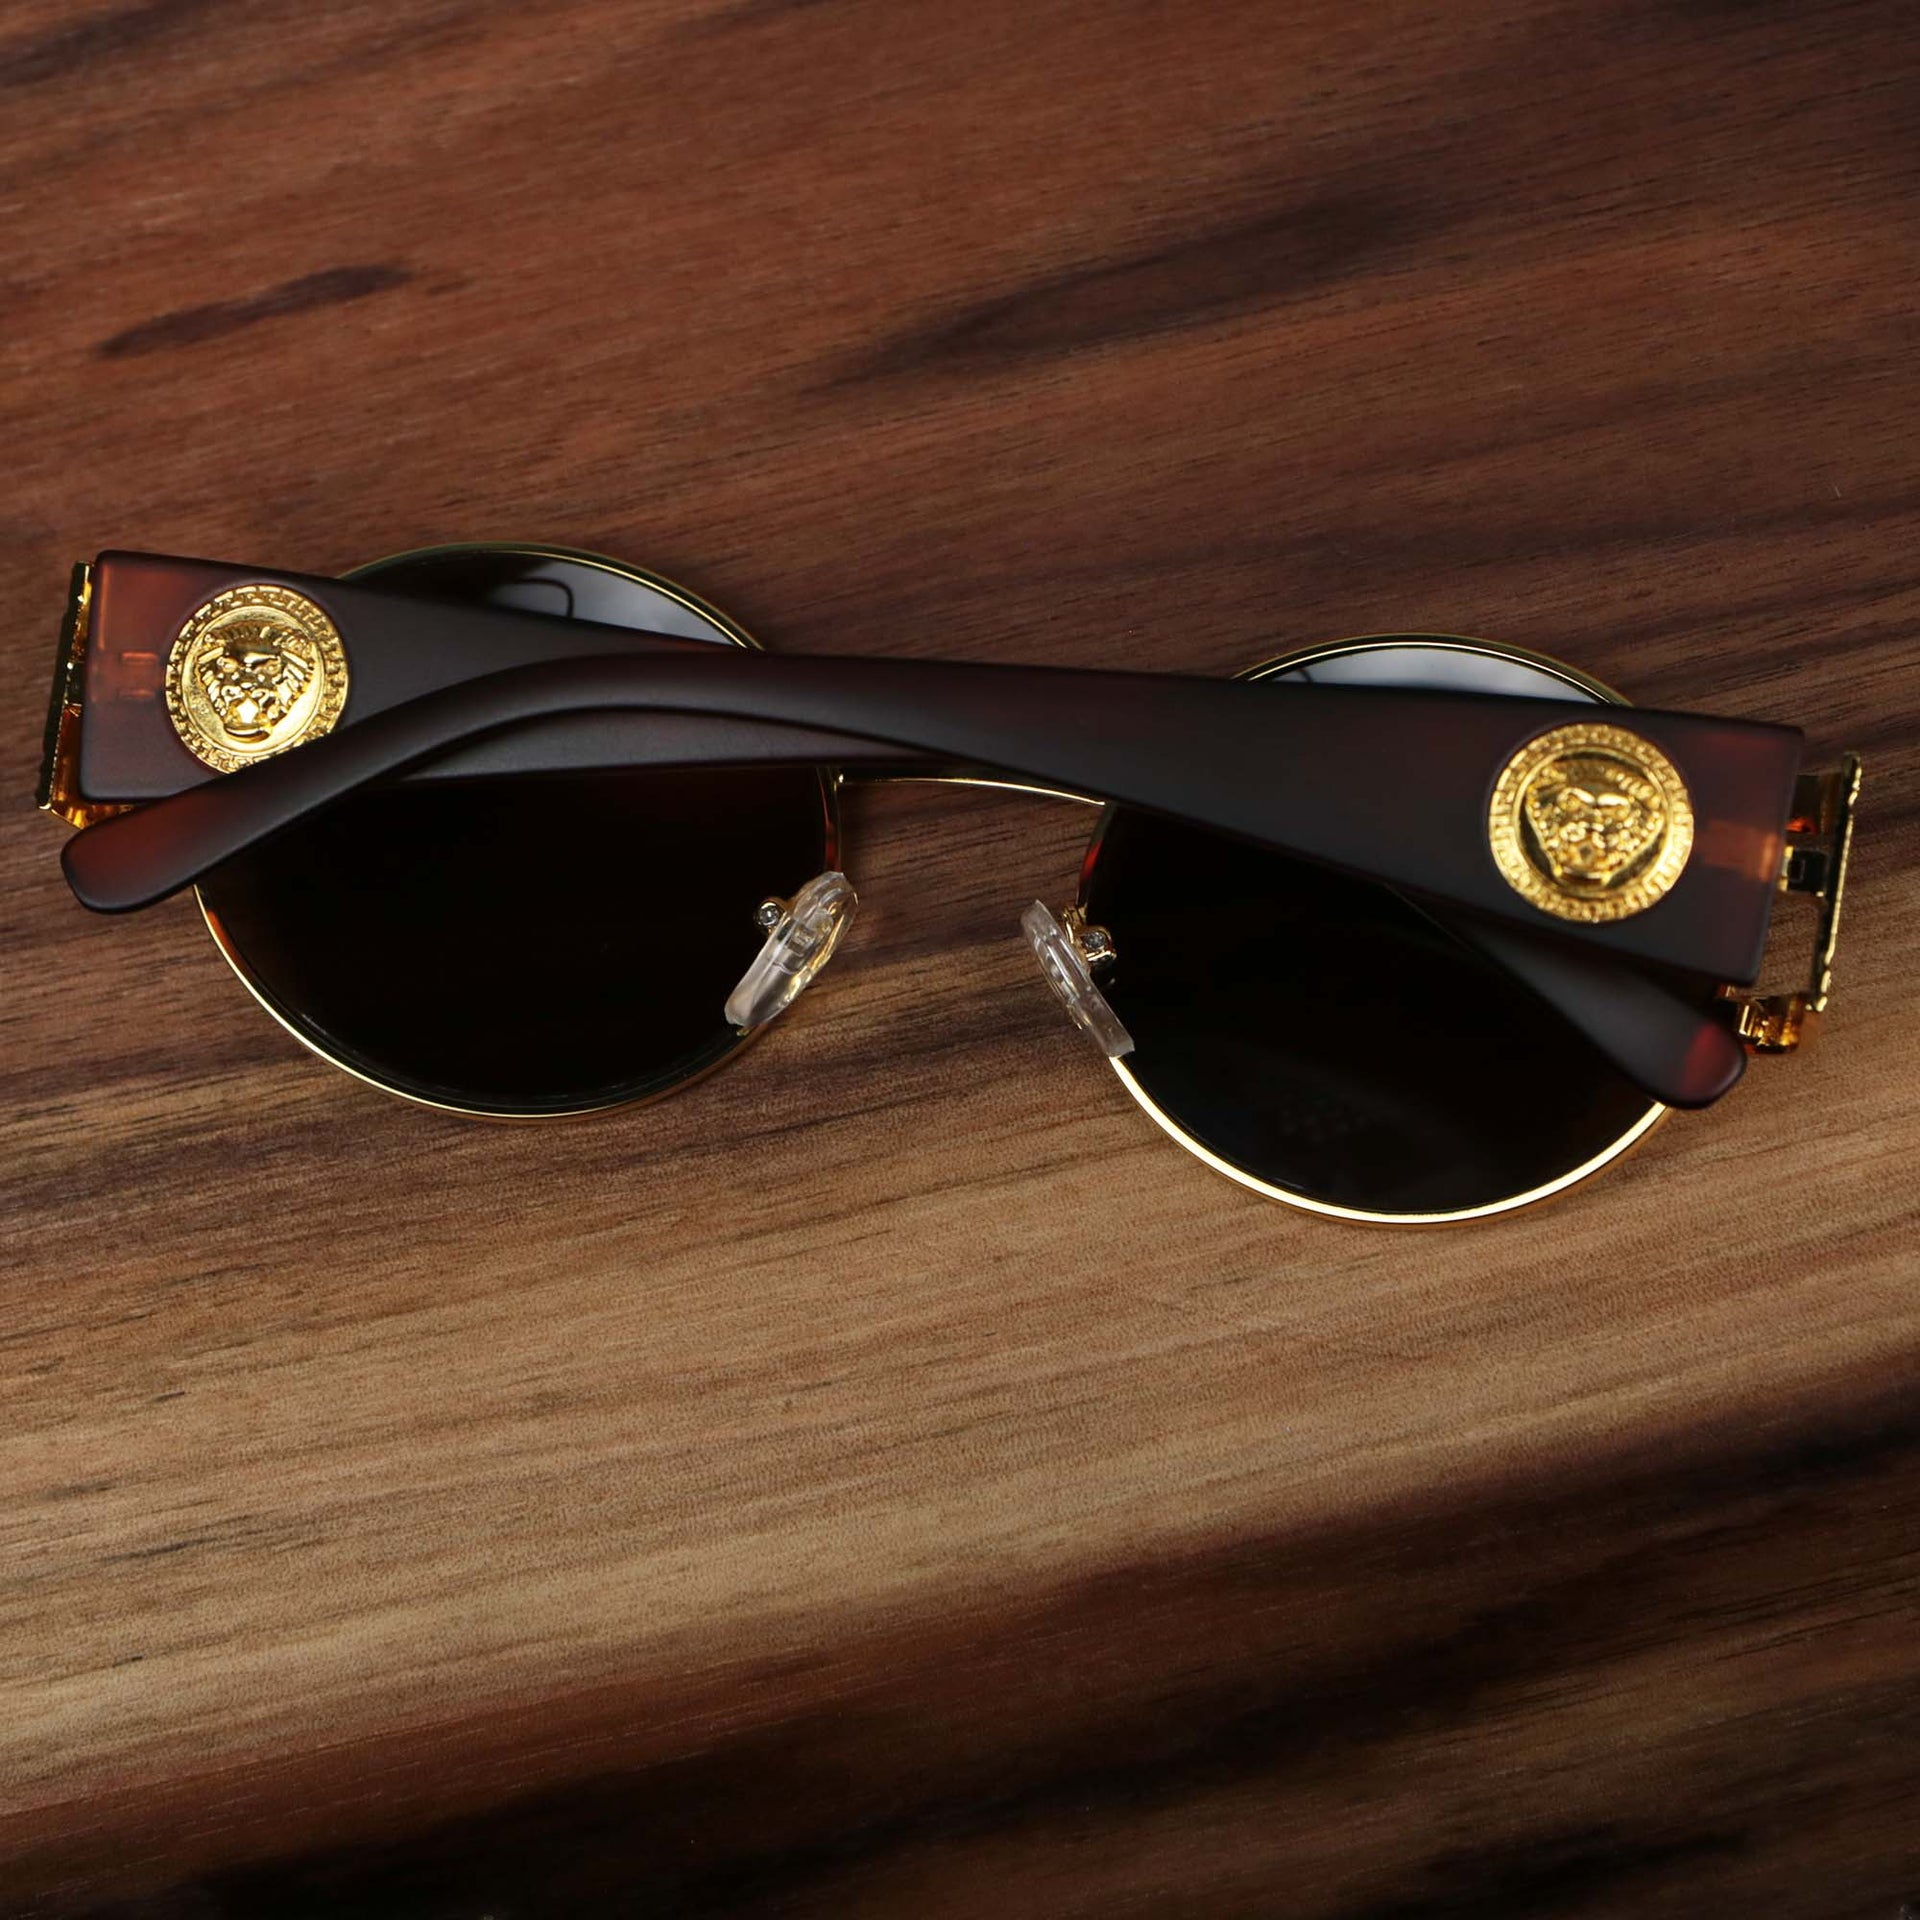 The Circle Frame Lion Head Emblem Brown Lens Sunglasses with Gold Frame folded up